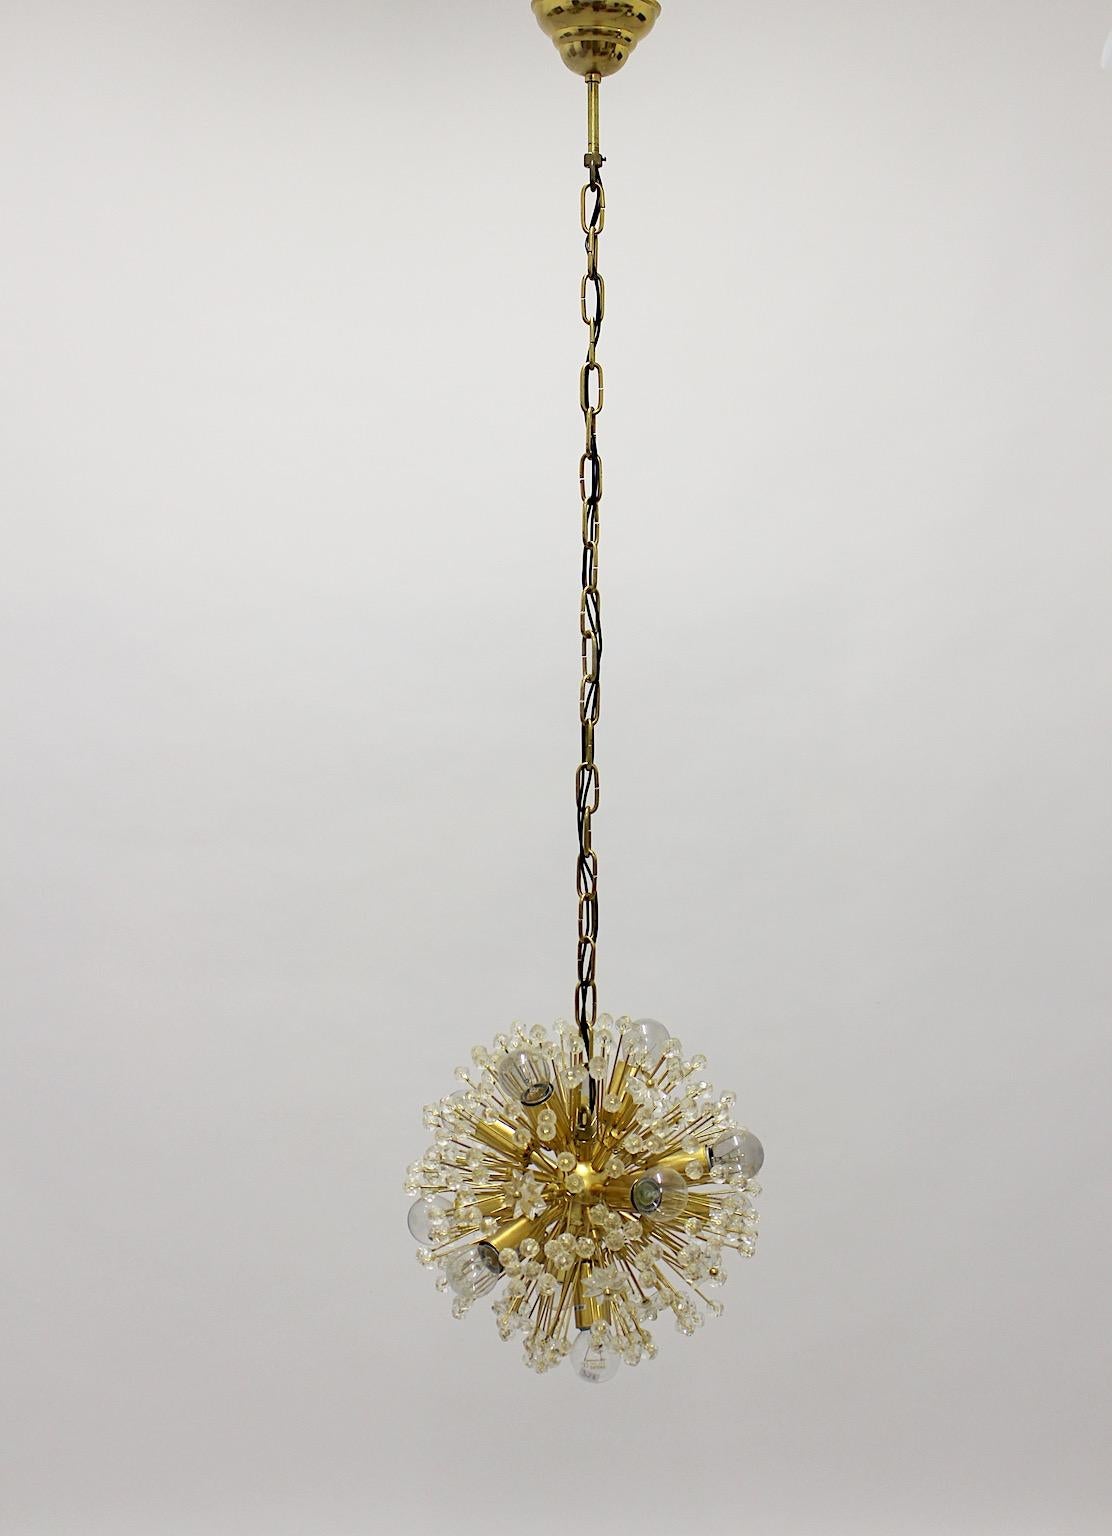 Organic vintage chandelier or hanging lamp in dandelion form from brass gold plate and lucite attributed to Emil Stejnar 1955 Vienna and manufactured 1960s.
An amazing vintage pendant showing a gold plated brass body with lucite stars and